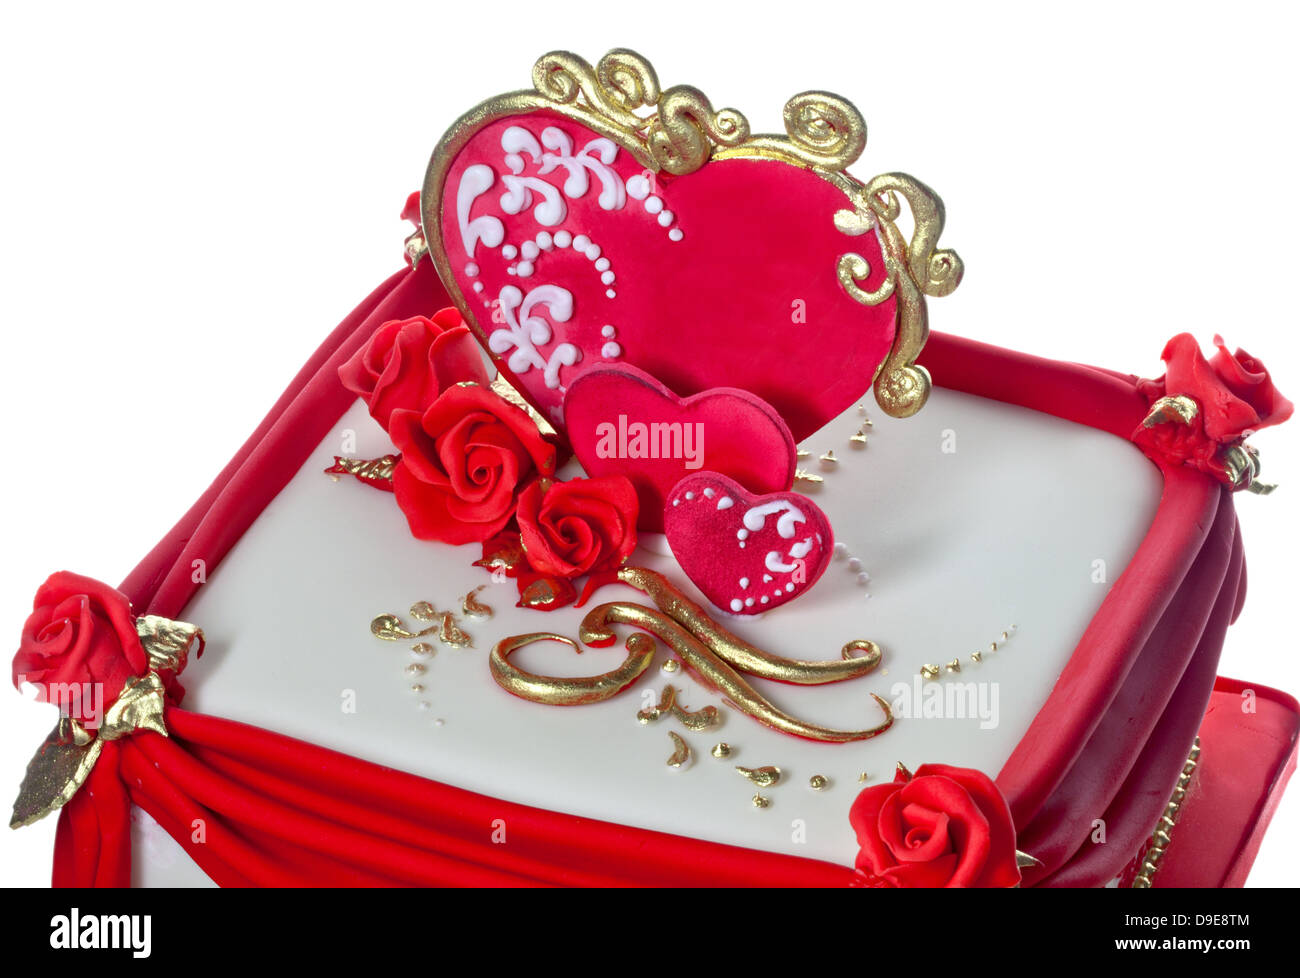 Red, white and gold iced cake decorated with hearts and roses. Stock Photo